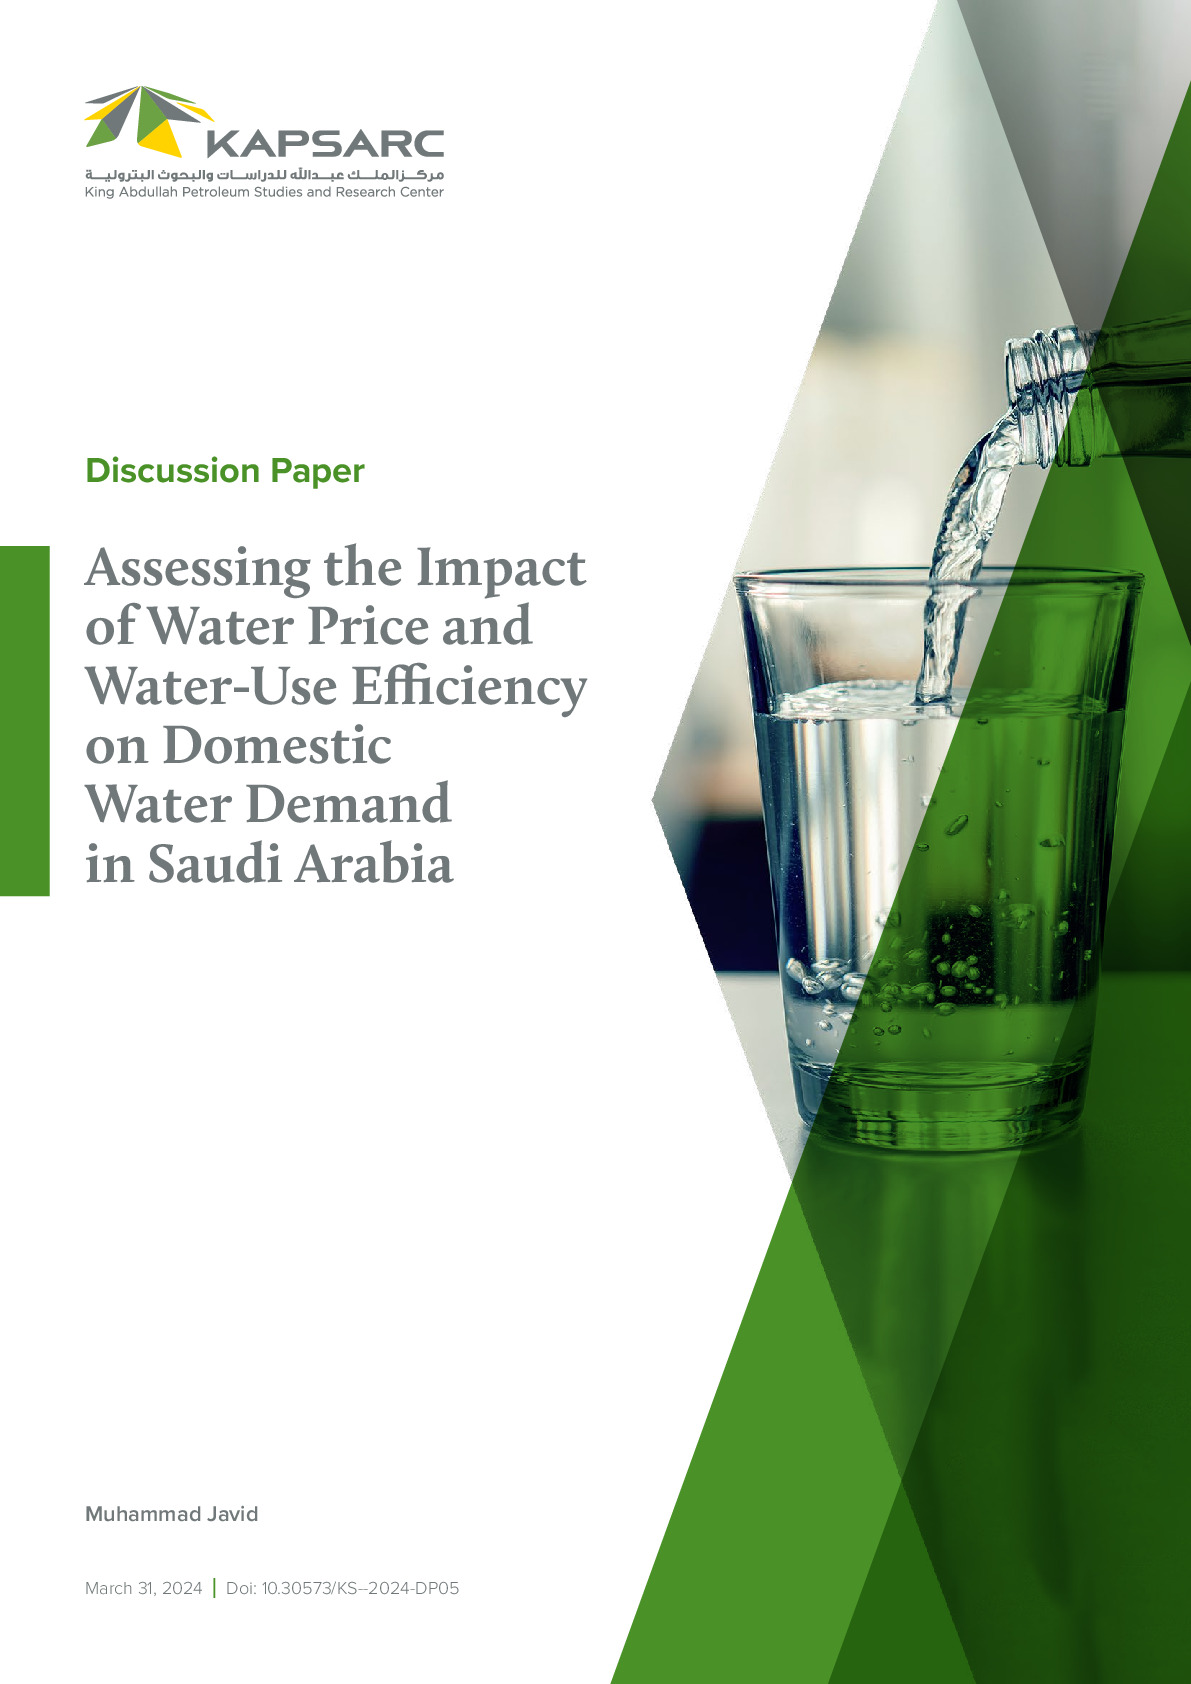 Assessing the Impact of Water Price Reform and Water-Use Efficiency on Domestic Water Demand in Saudi Arabia